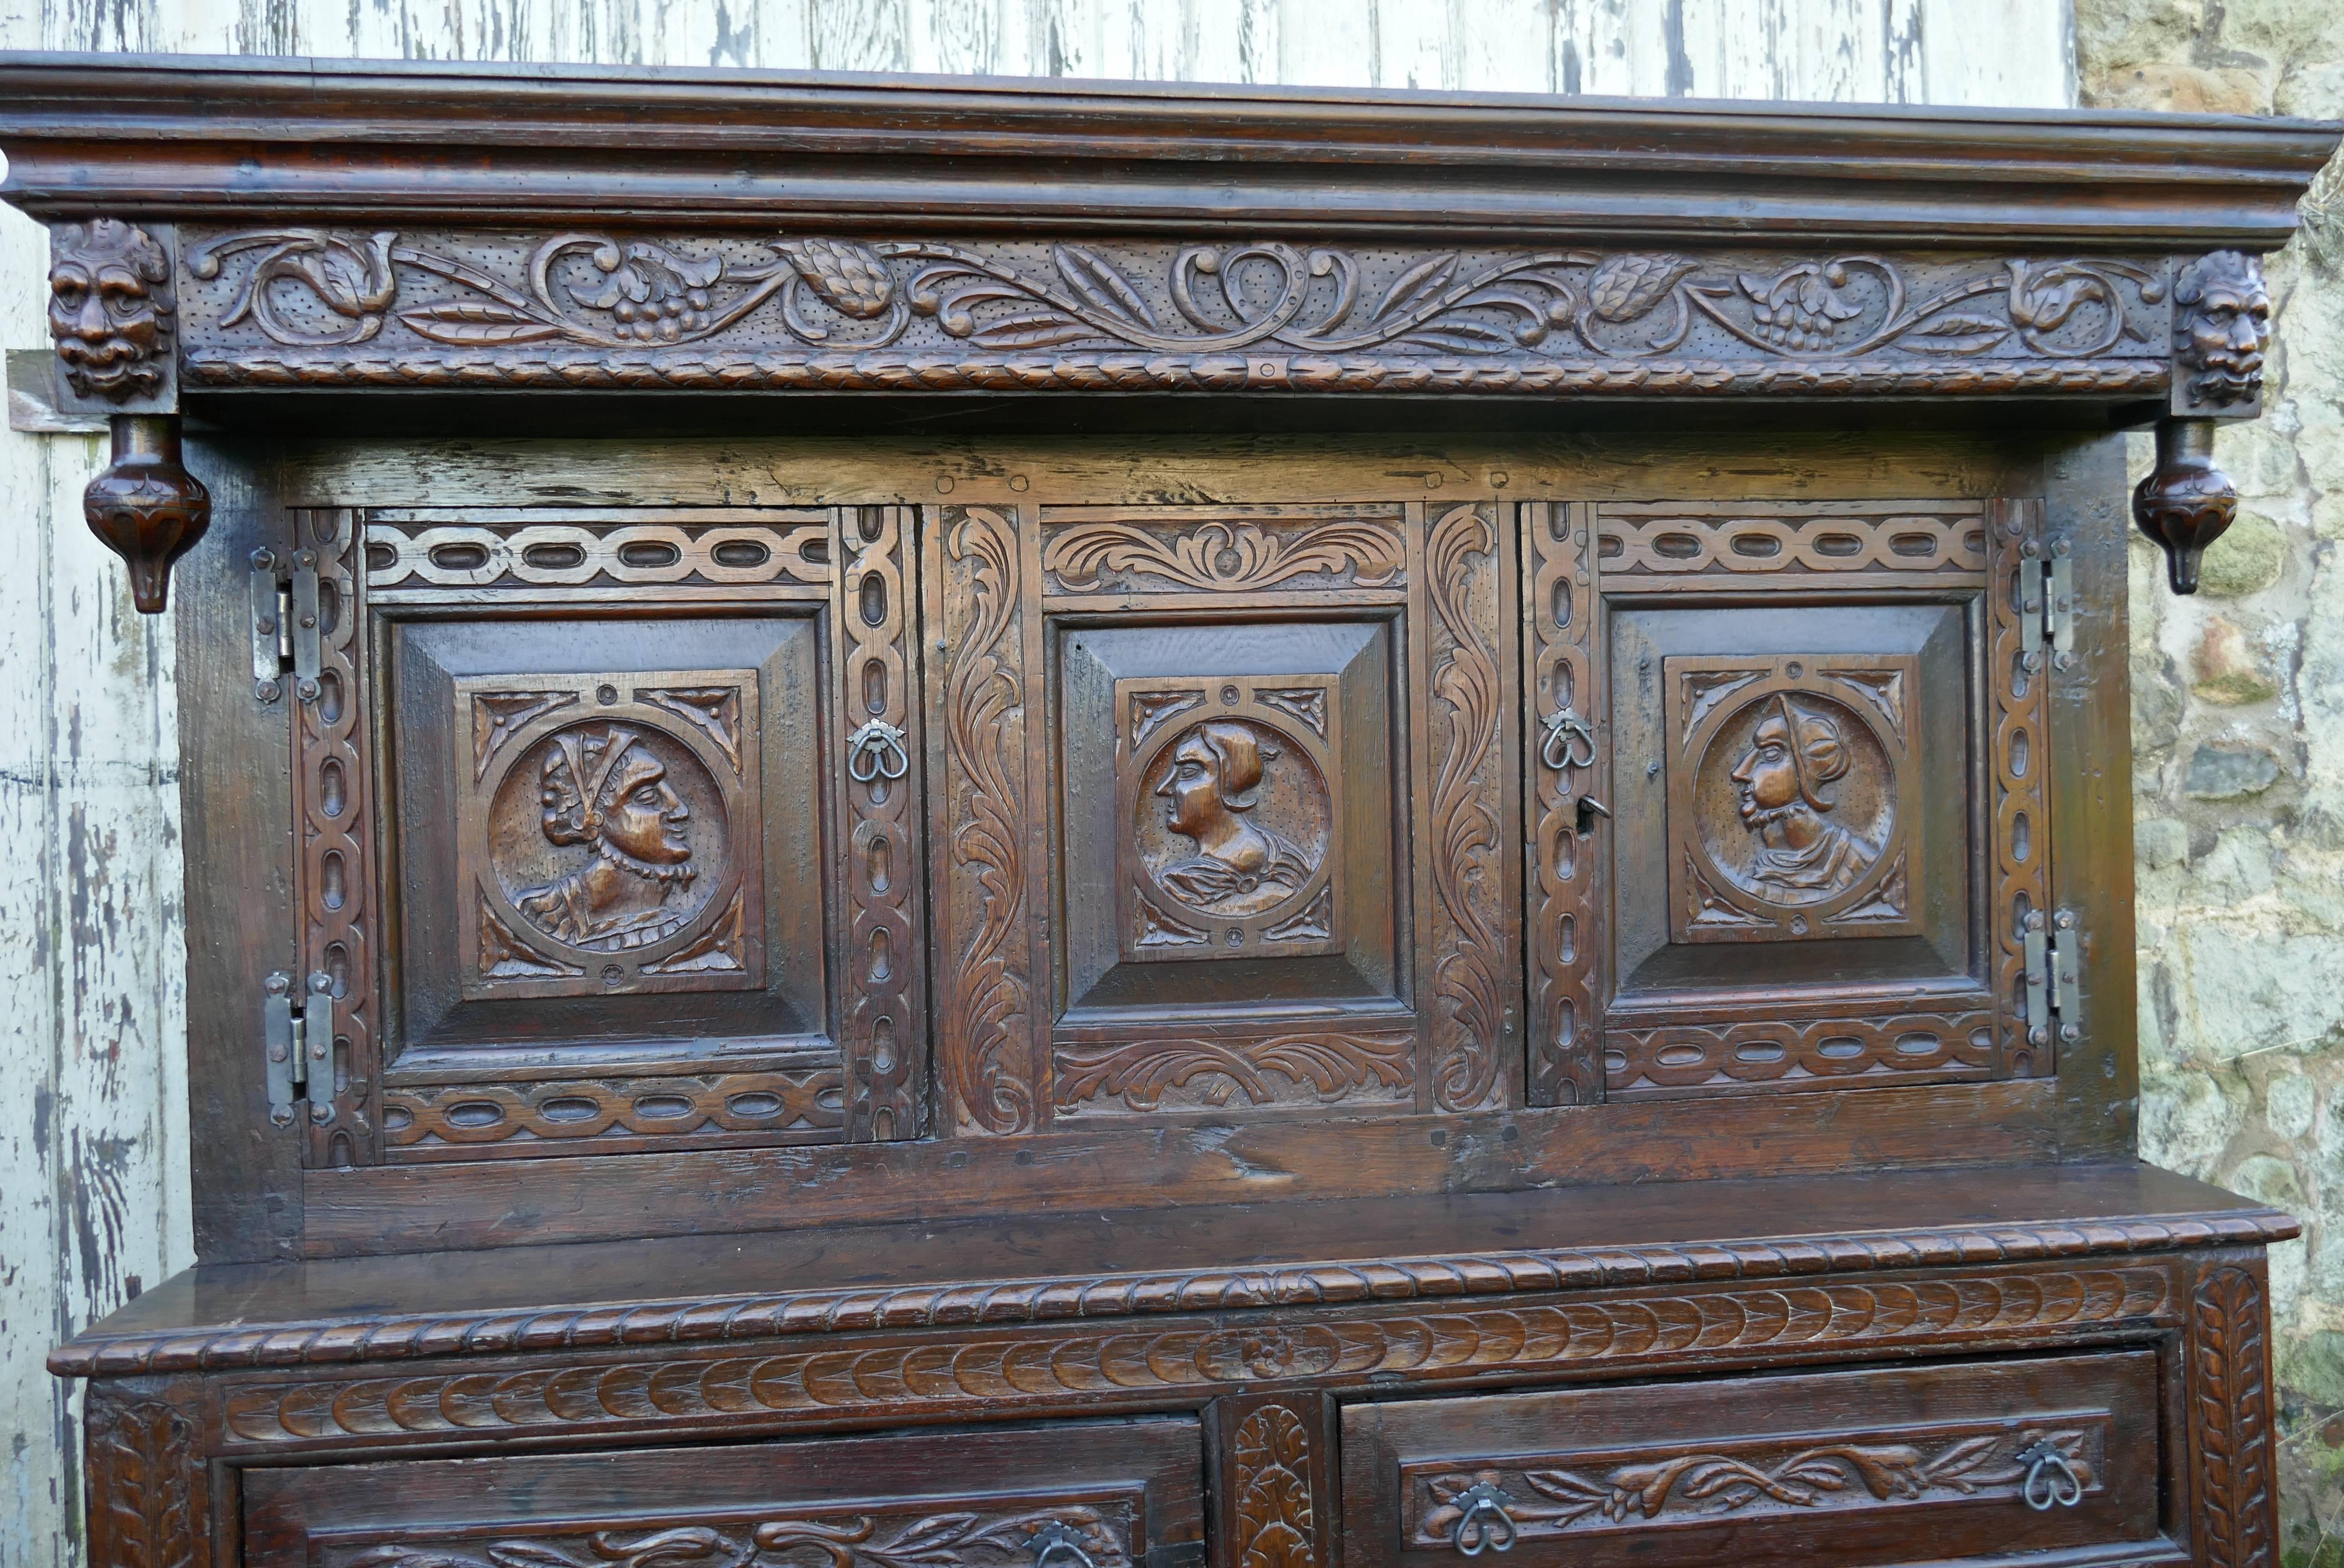 This is an old and charming rustic piece of carved oak furniture, the top section has a long cupboard enclosed by 2 doors and a centre panel, each of the carved panels has the face of a warrior or similar character, it has a carved cornice on the